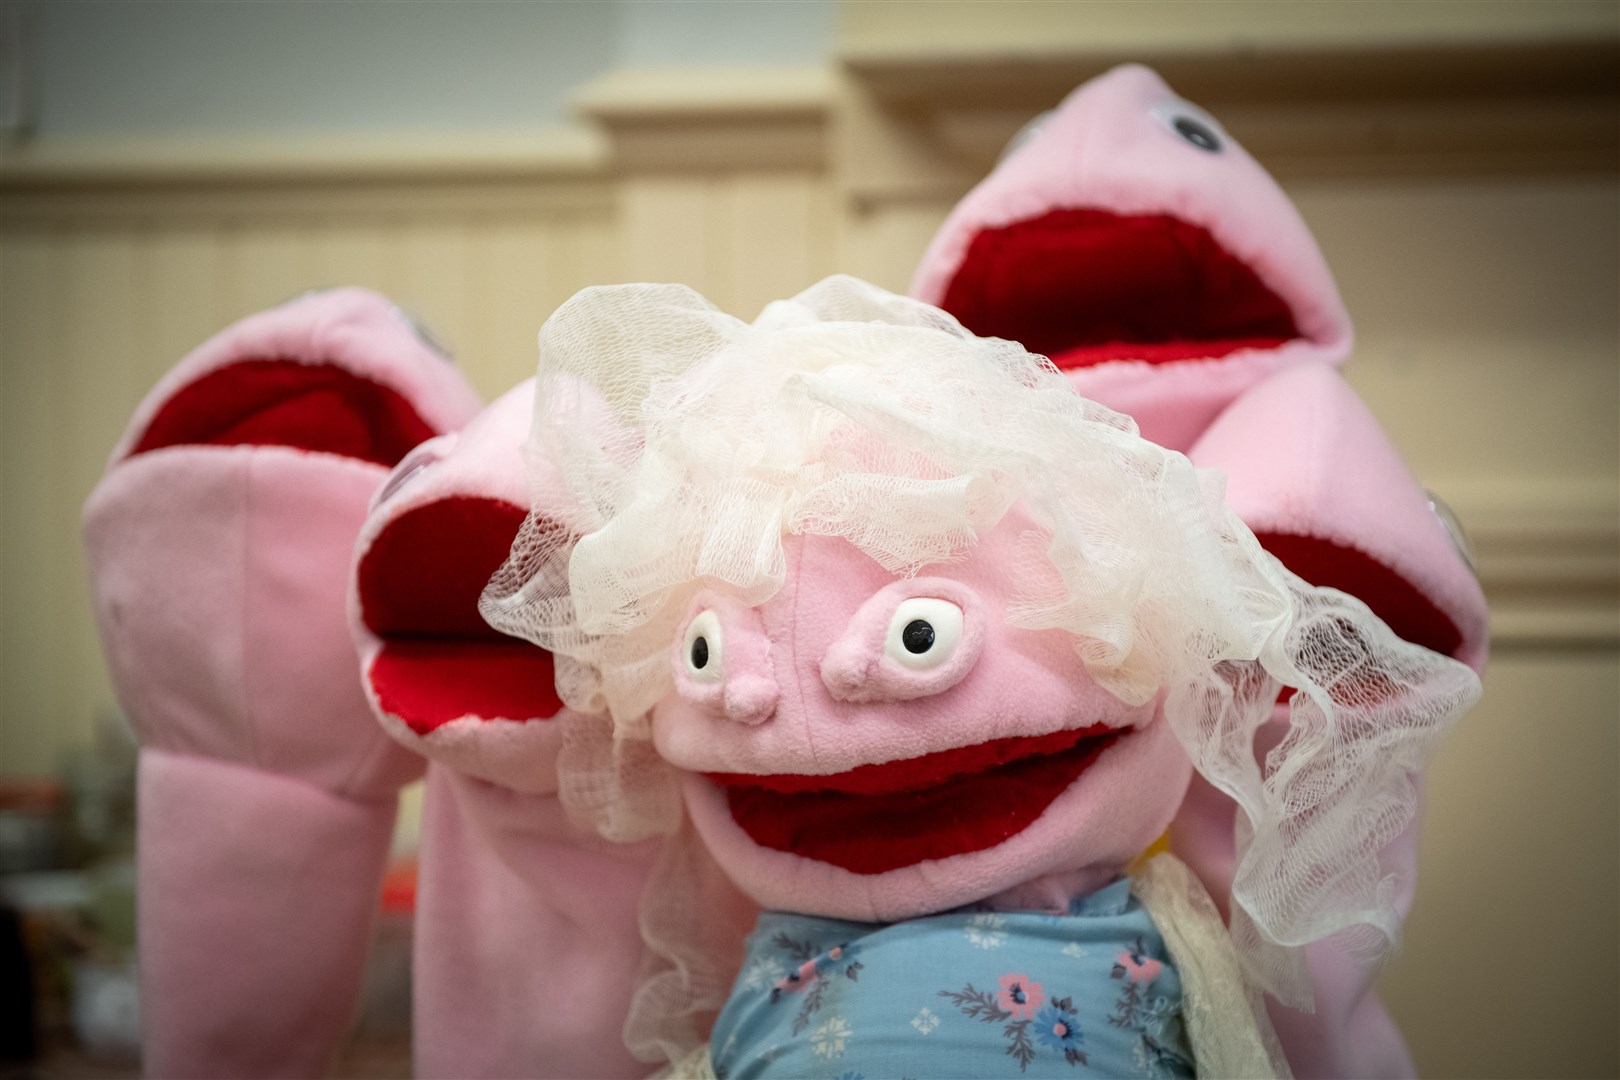 Windows of Reality at Eden Court Theatre in Inverness will feature puppets. Picture: Callum Mackay.